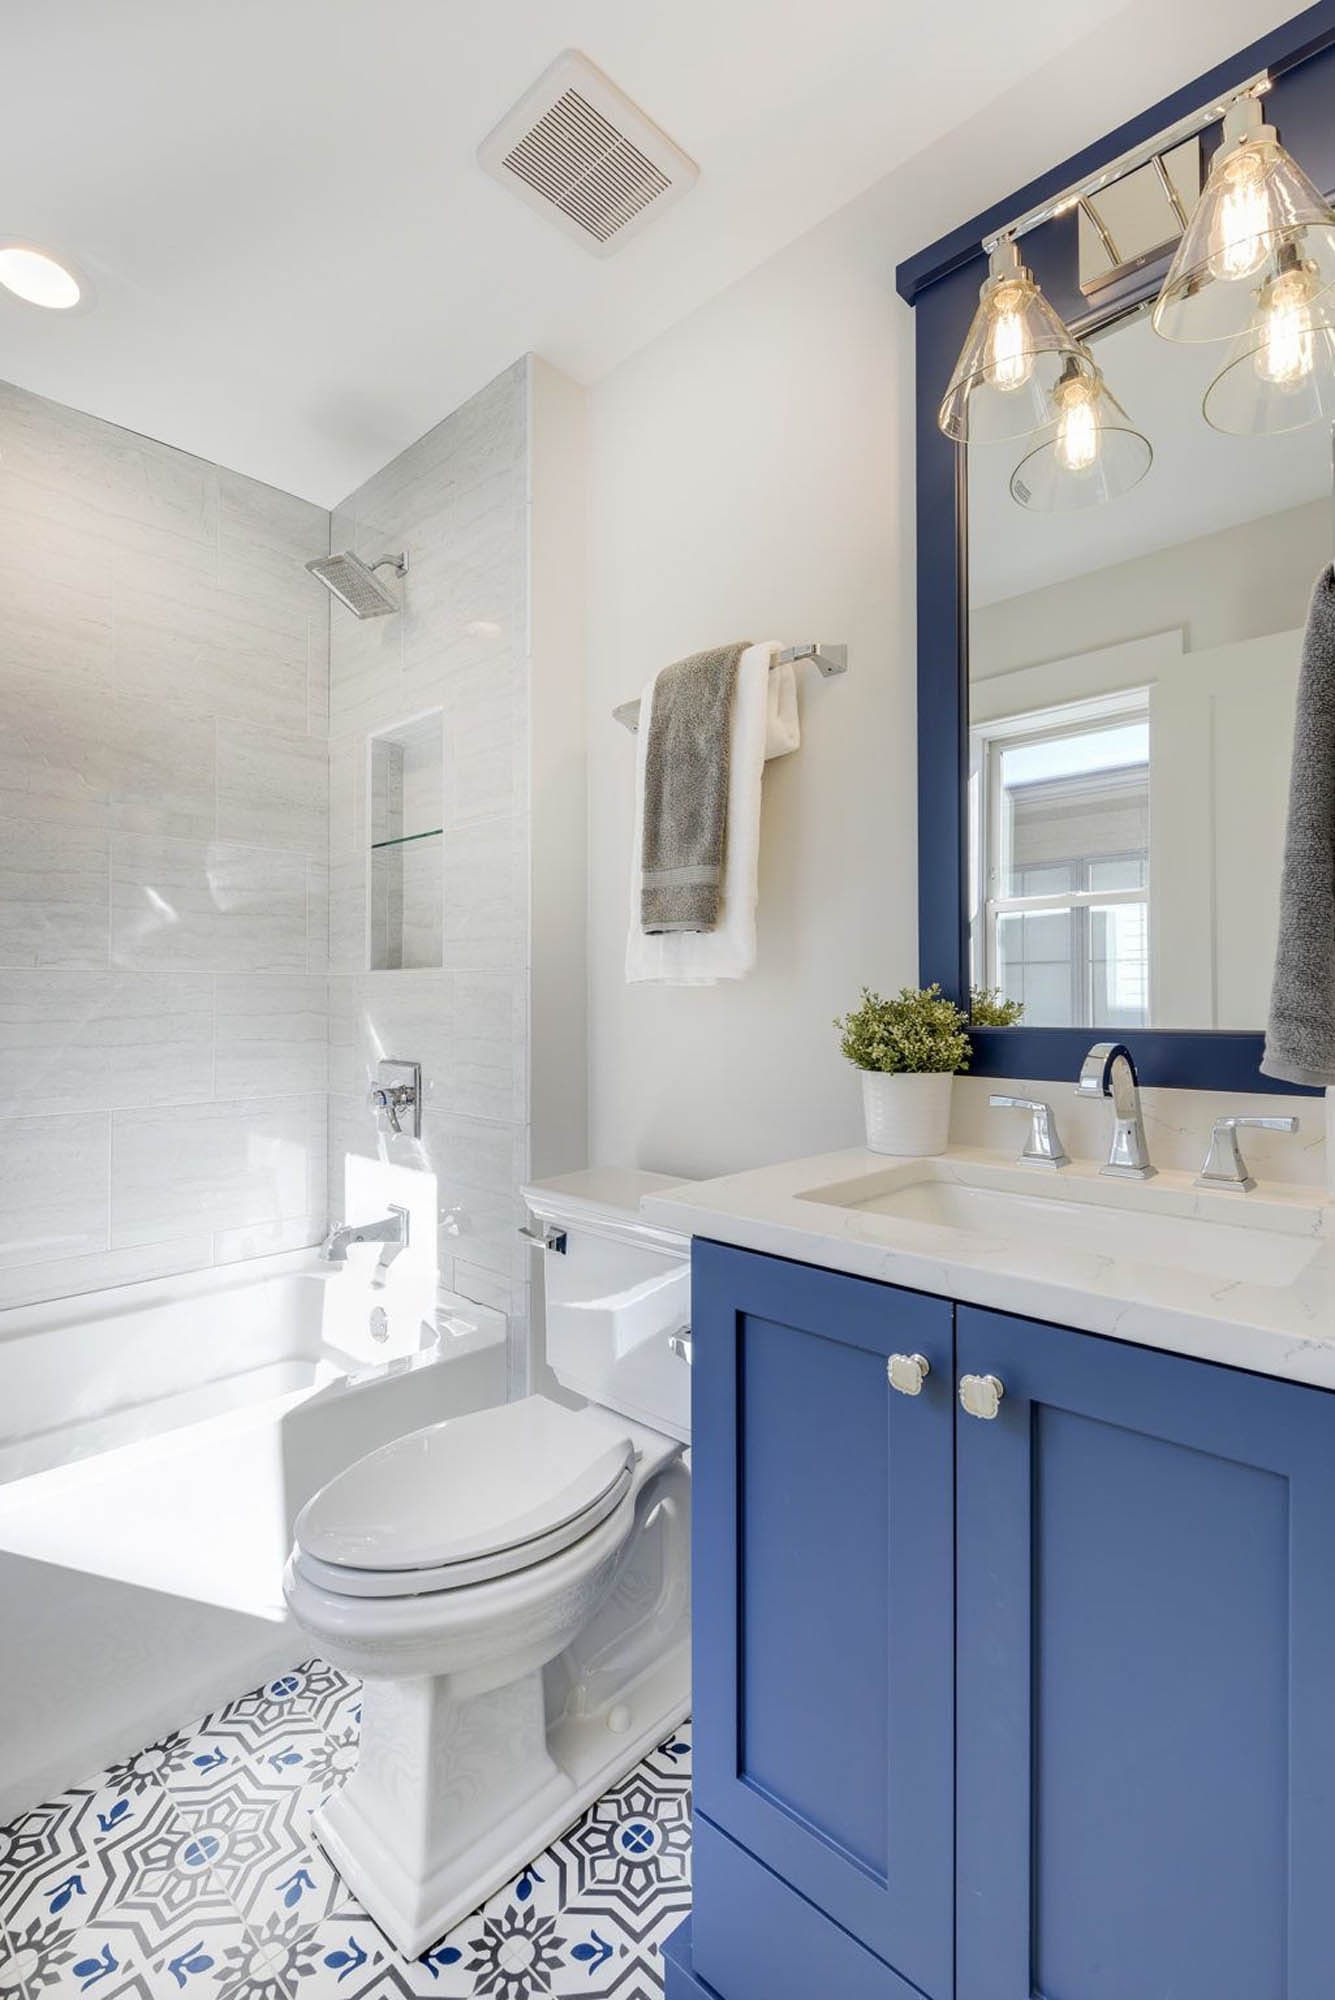 6 Bathroom Trends to Try Now - The Tile Shop Blog